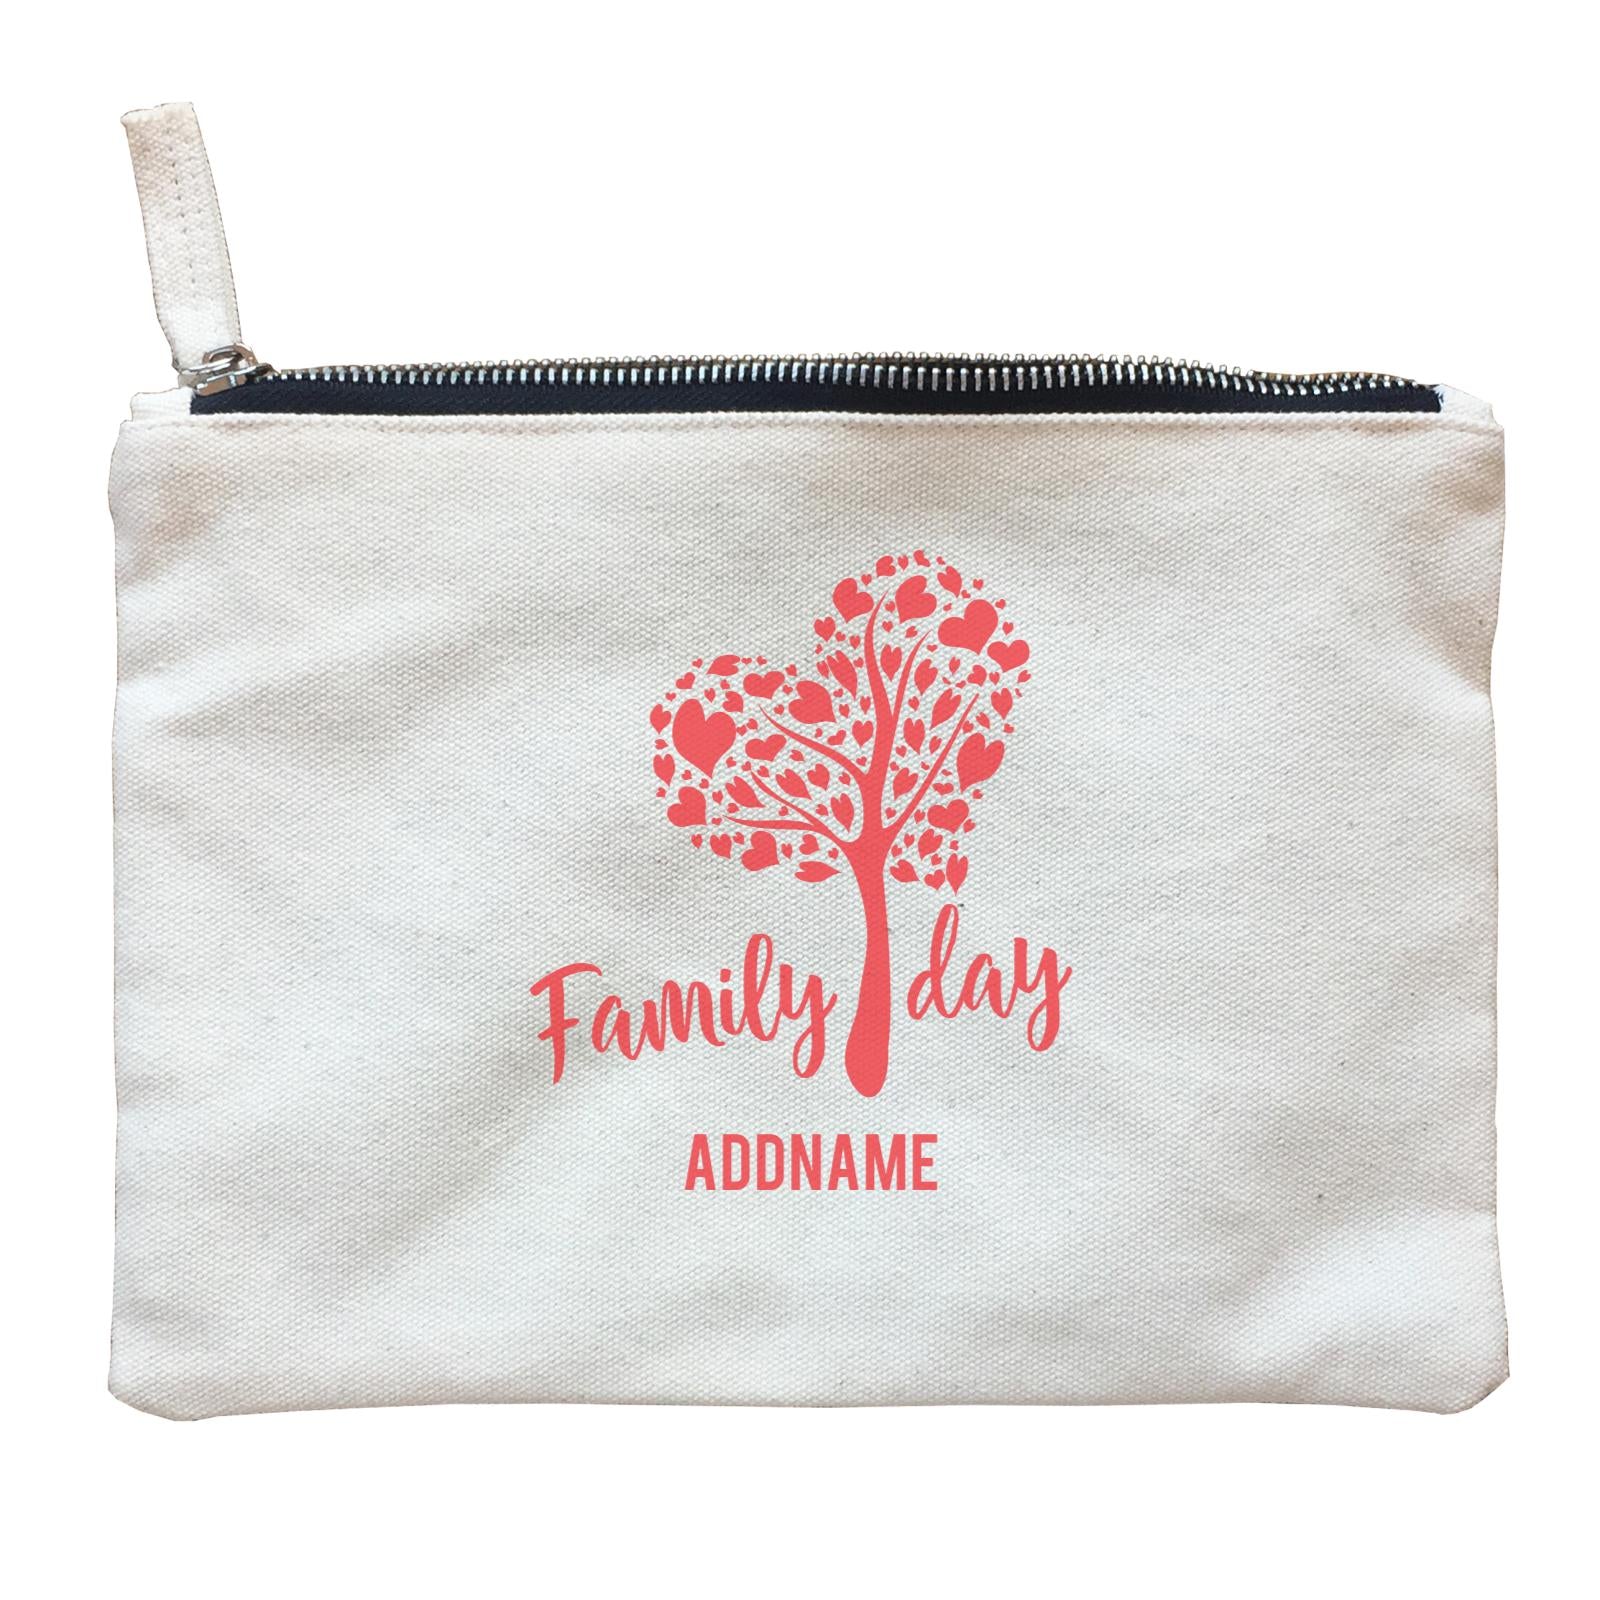 Family Day Love Tree With Love Leaves Family Day Addname Zipper Pouch